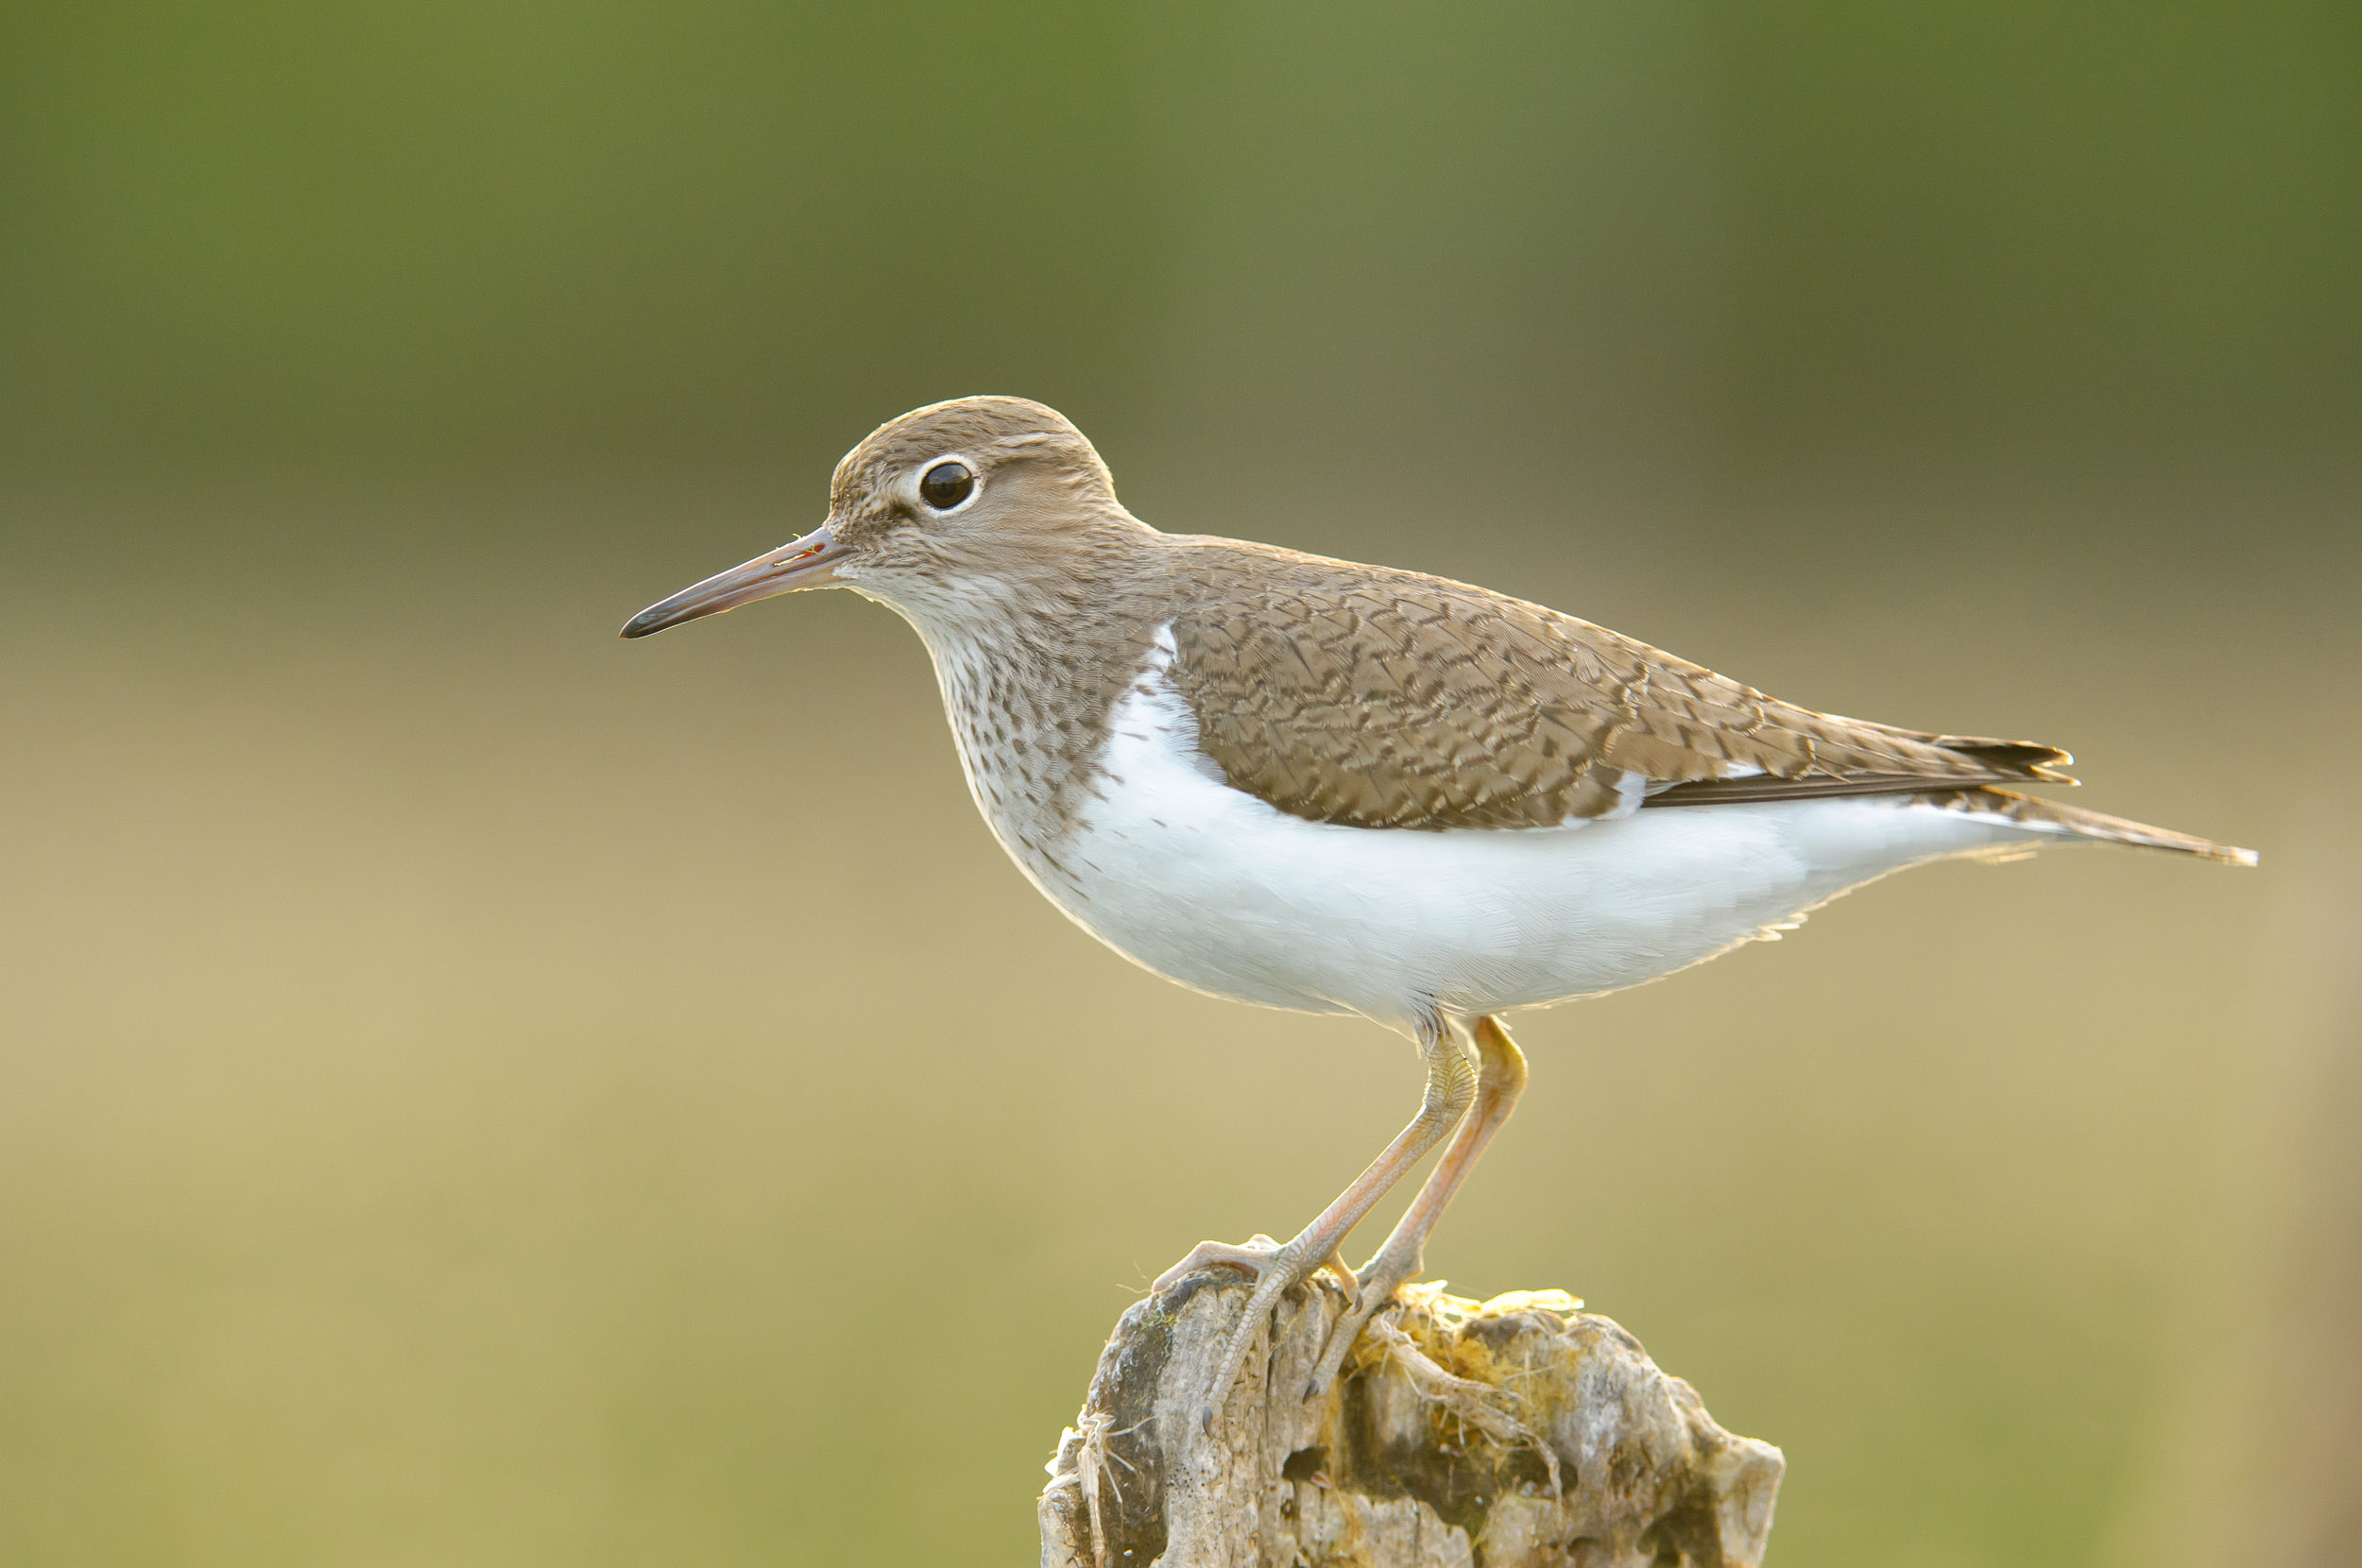 A Common Sandpiper perched on the top of a stump.